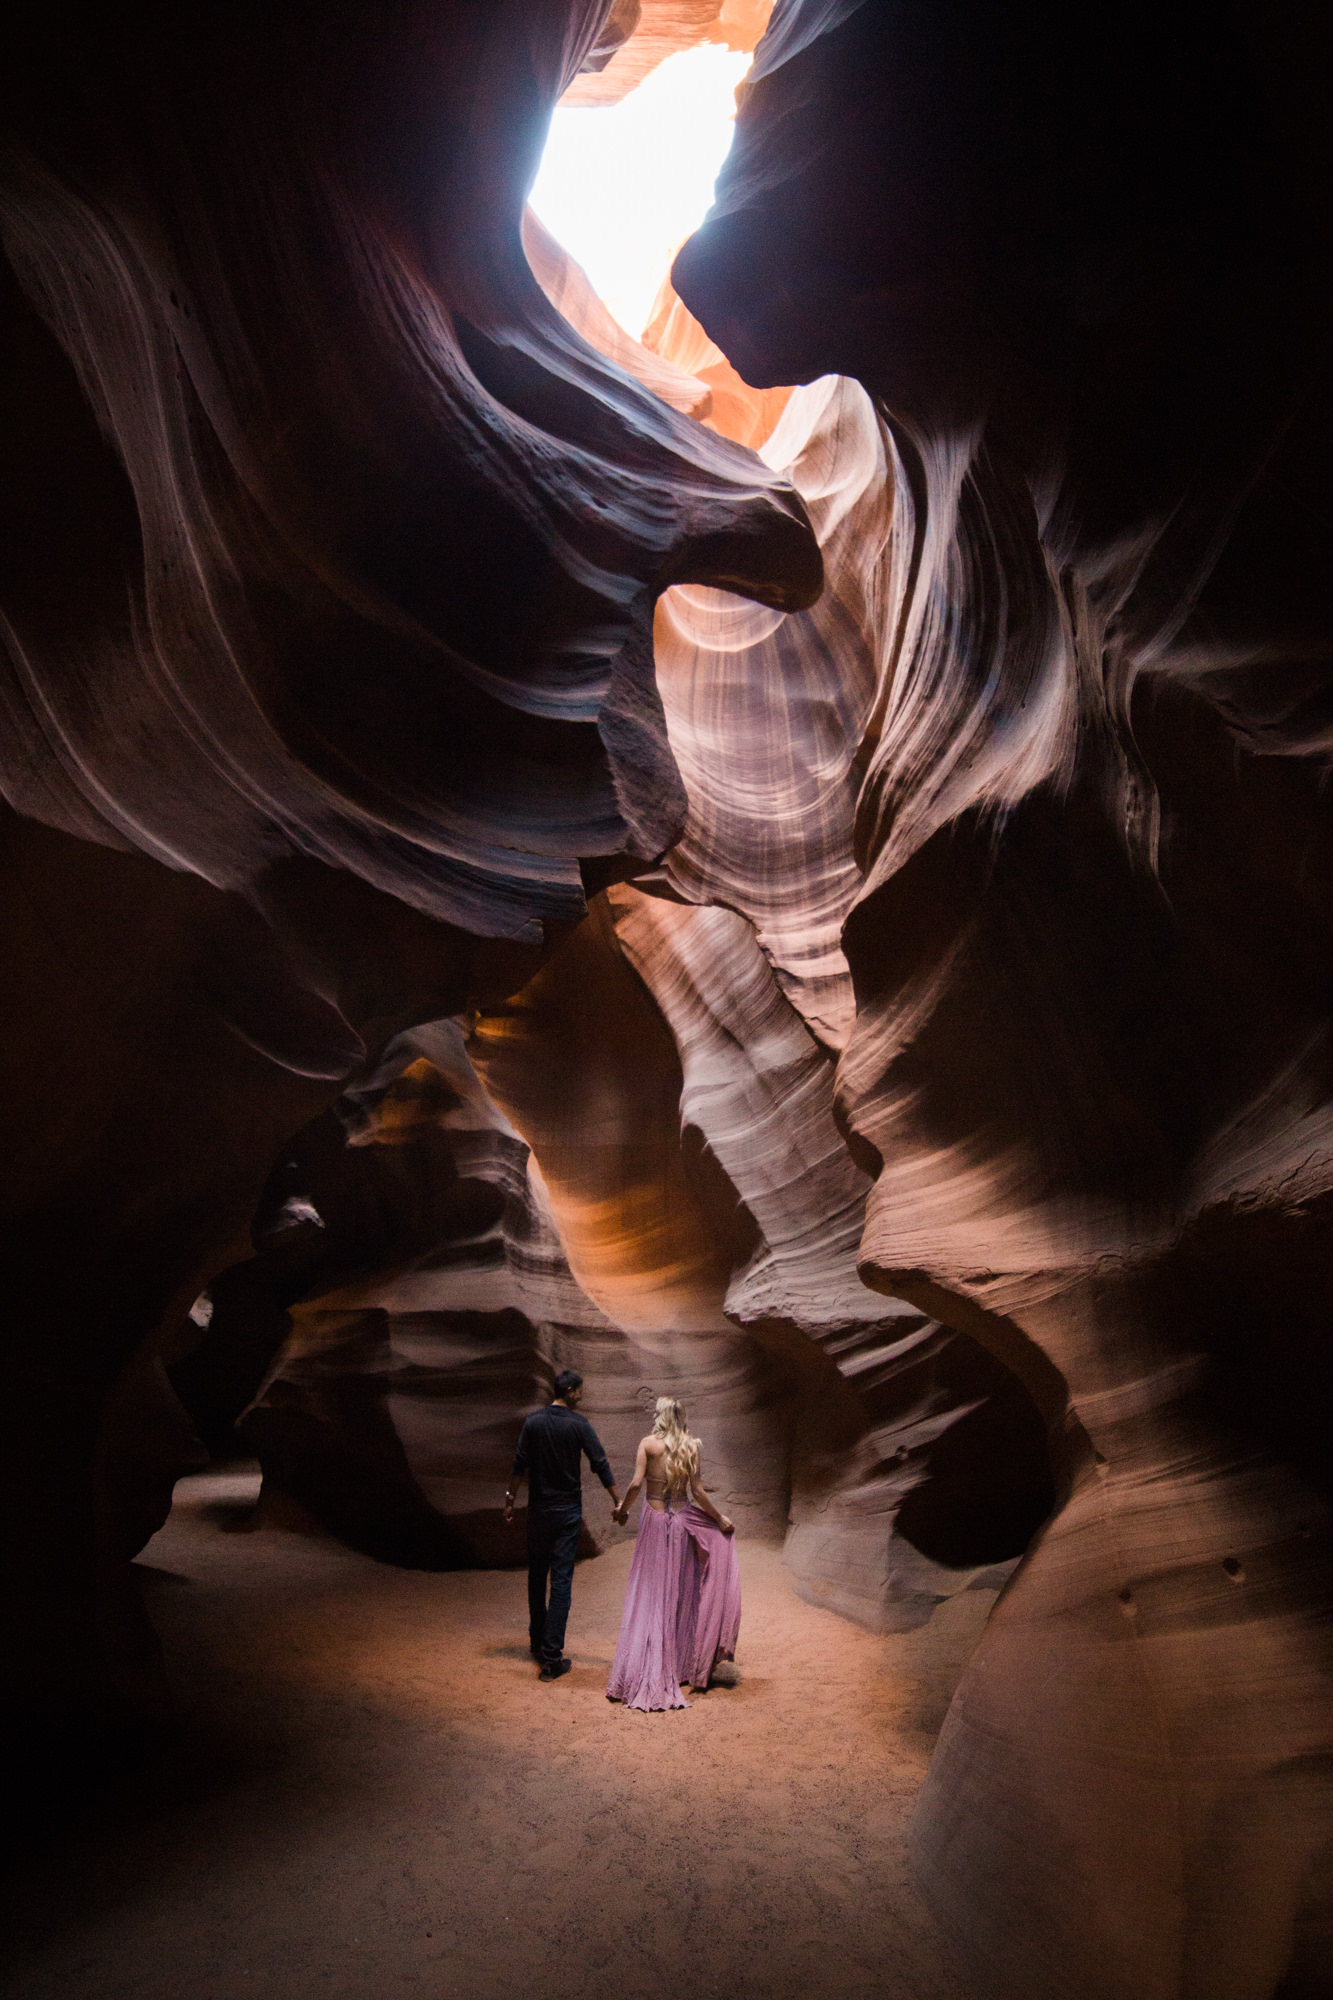 adventure elopement session in antelope canyon | destination engagement photo inspiration | utah adventure elopement photographers | the hearnes adventure photography | www.thehearnes.com